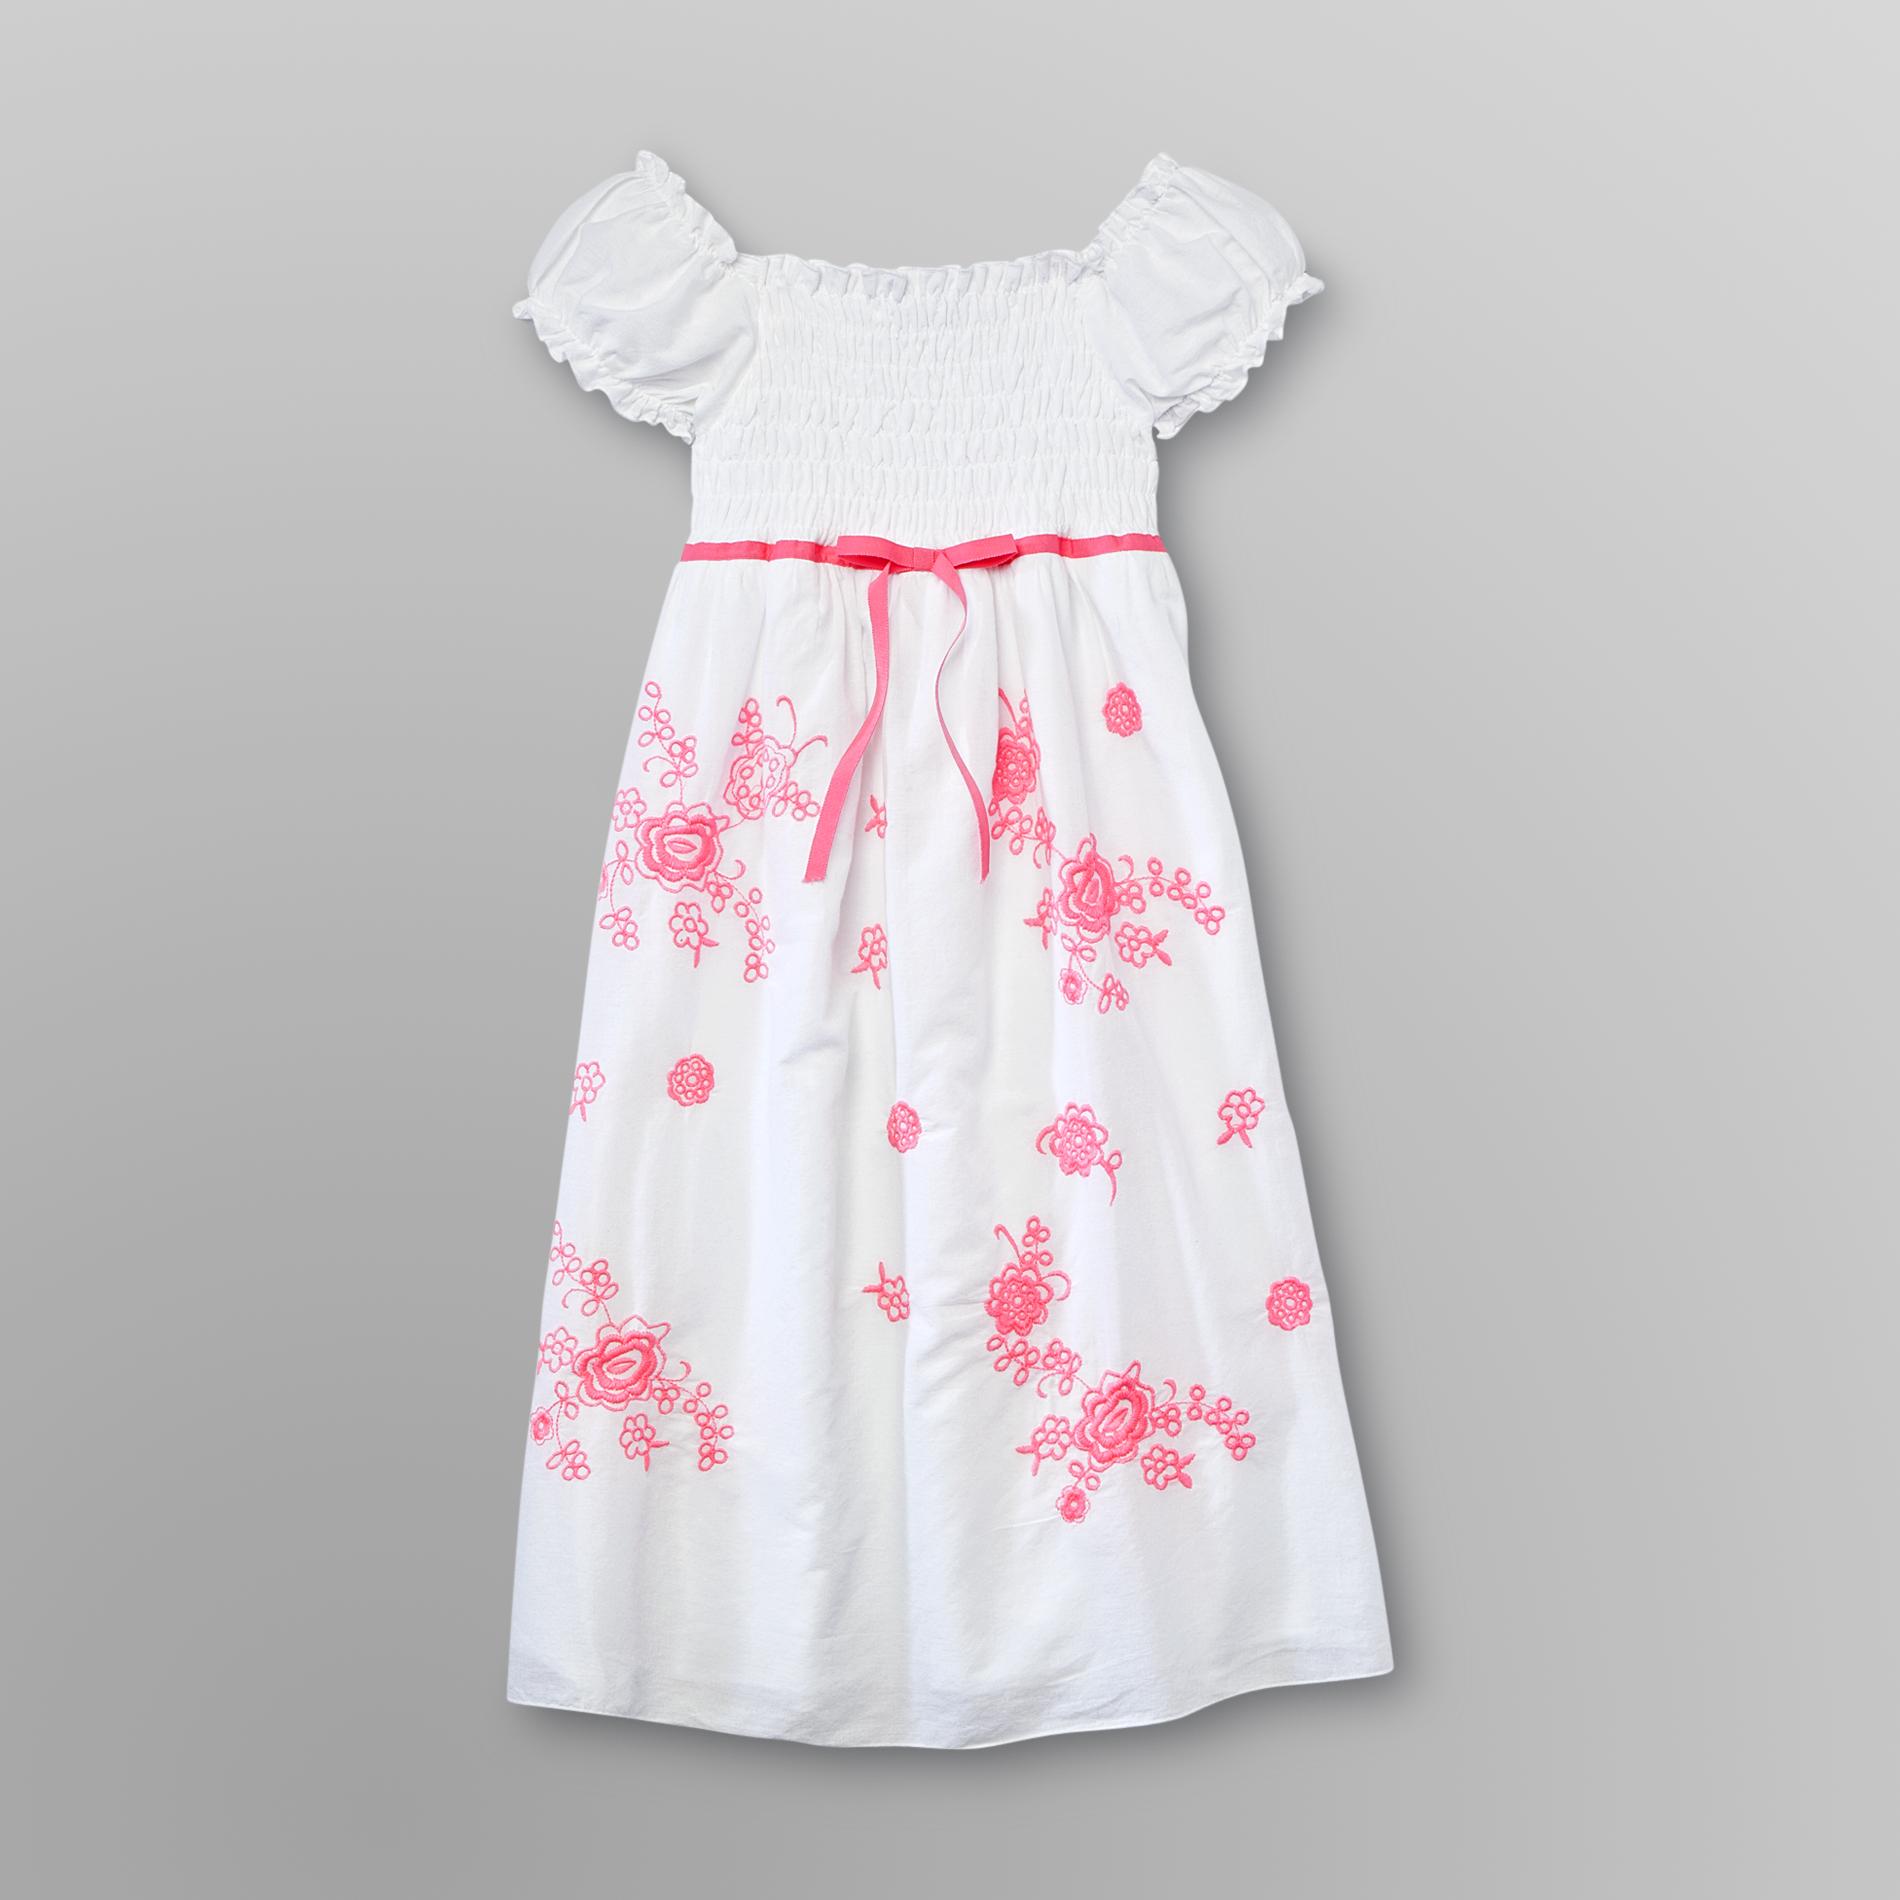 Speechless Girl's Cotton Dress - Floral Embroidery